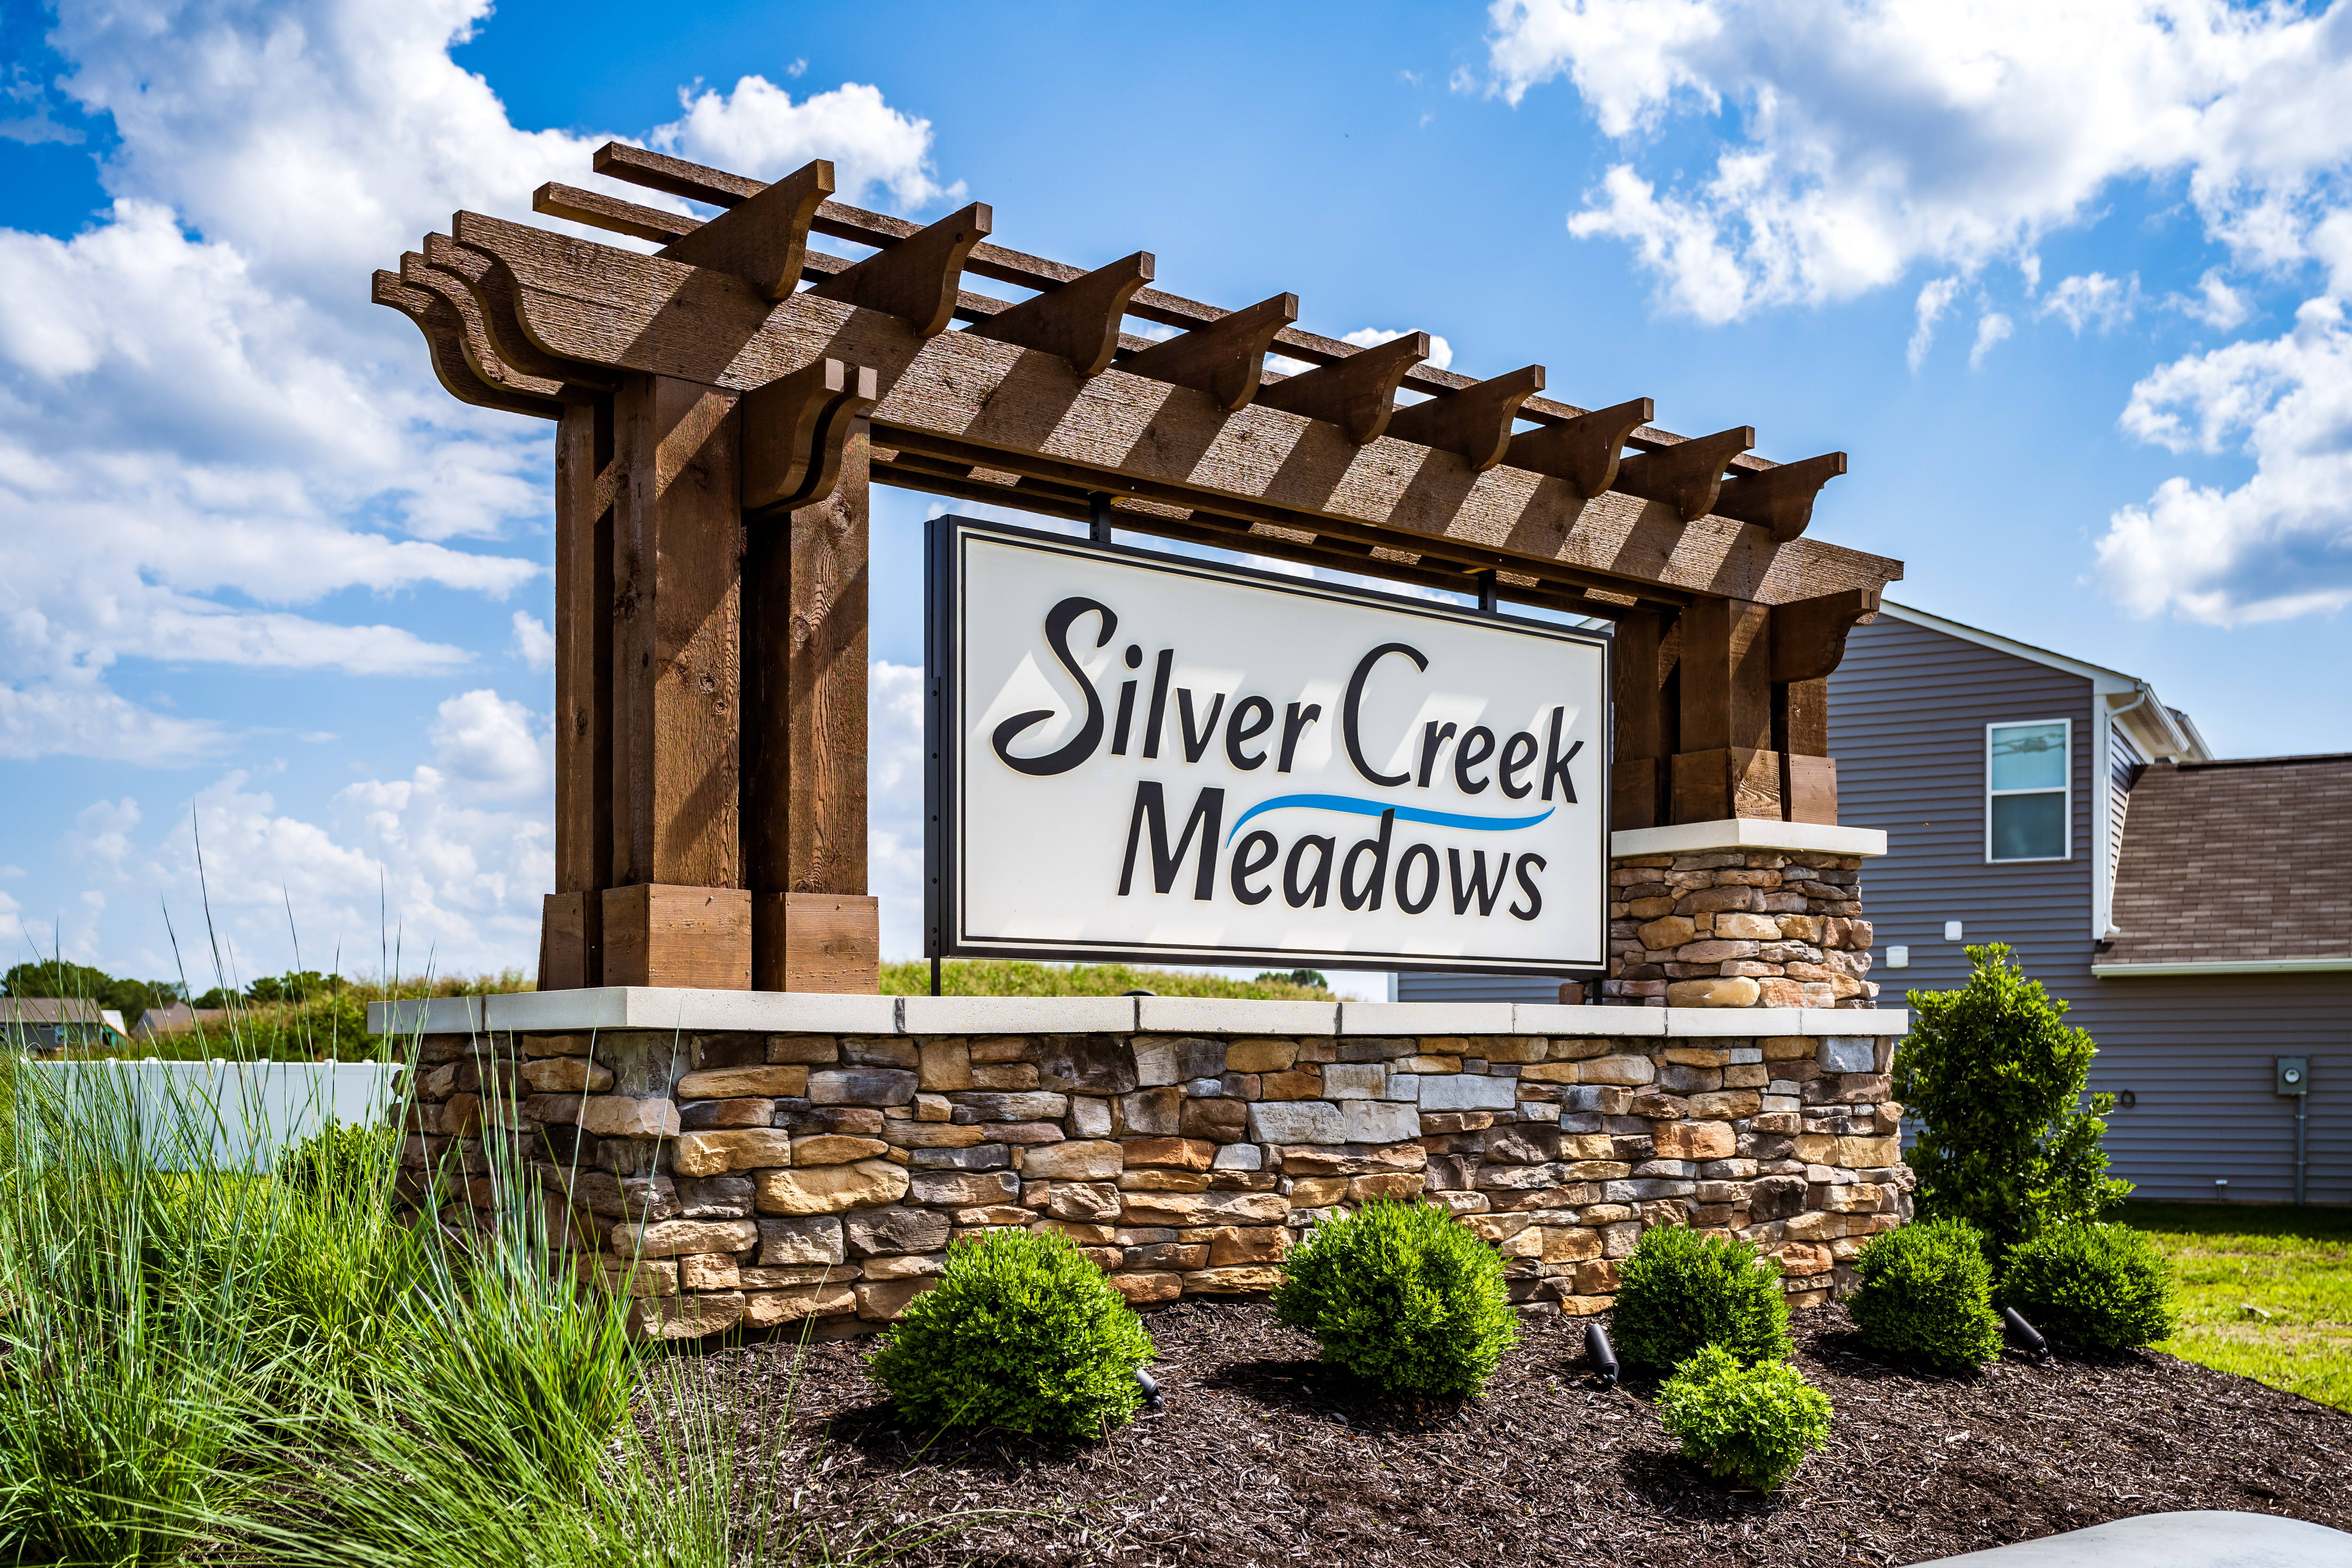 Get to know Silver Creek Meadows! Silver Creek Meadows is located off Salem-Noble Road in Charlestown, Indiana just 20 minutes north of downtown Louisville.